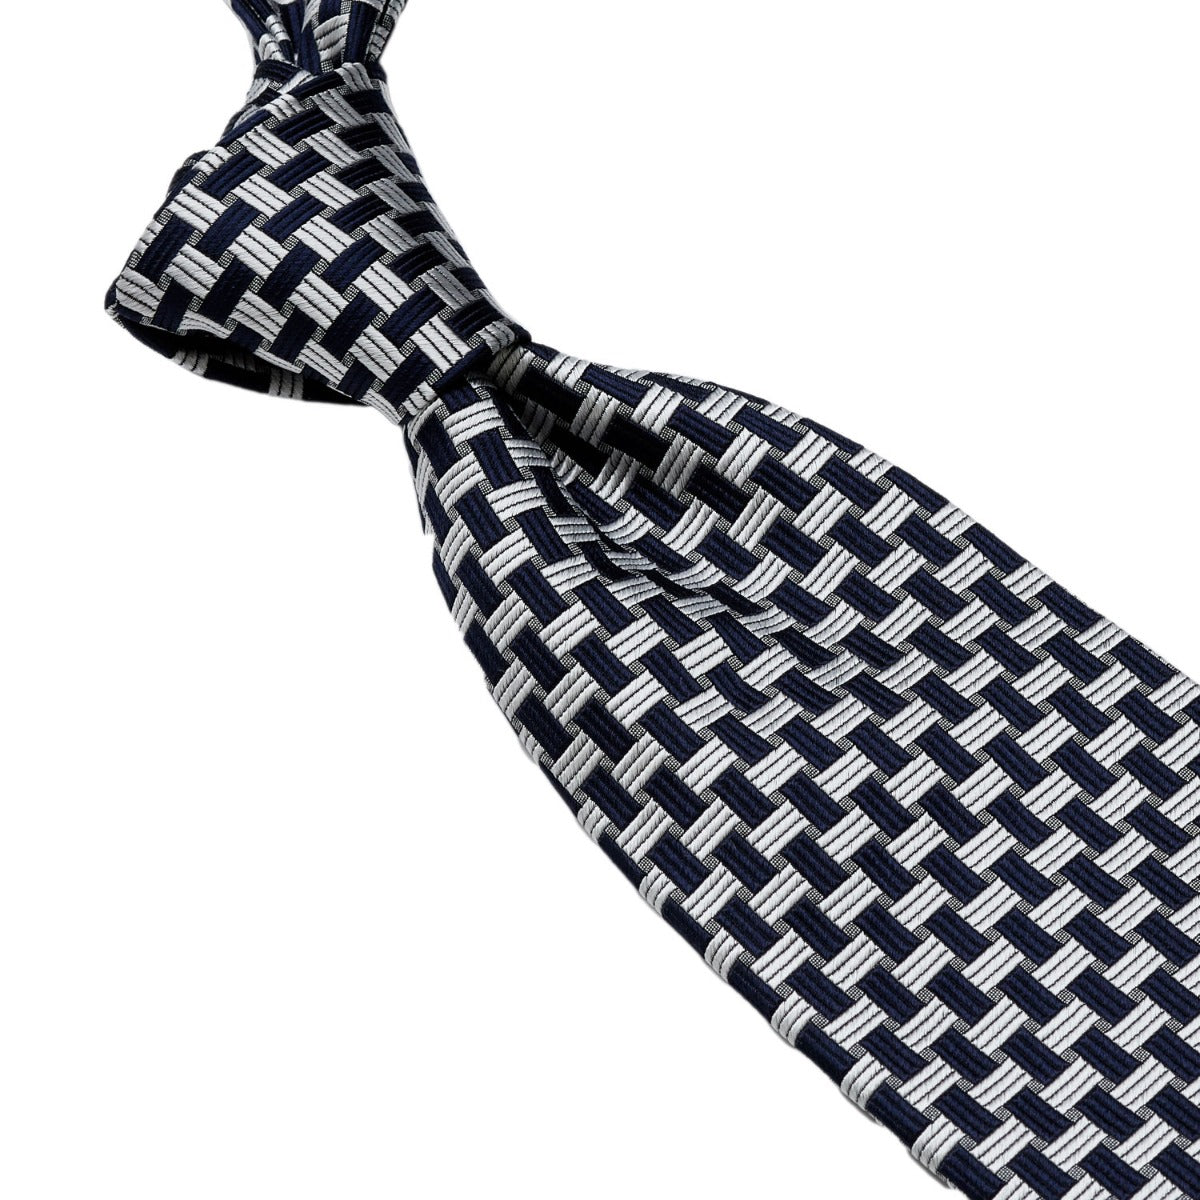 A Sovereign Grade Navy Basket Weave Silk Tie from KirbyAllison.com with premium linings.